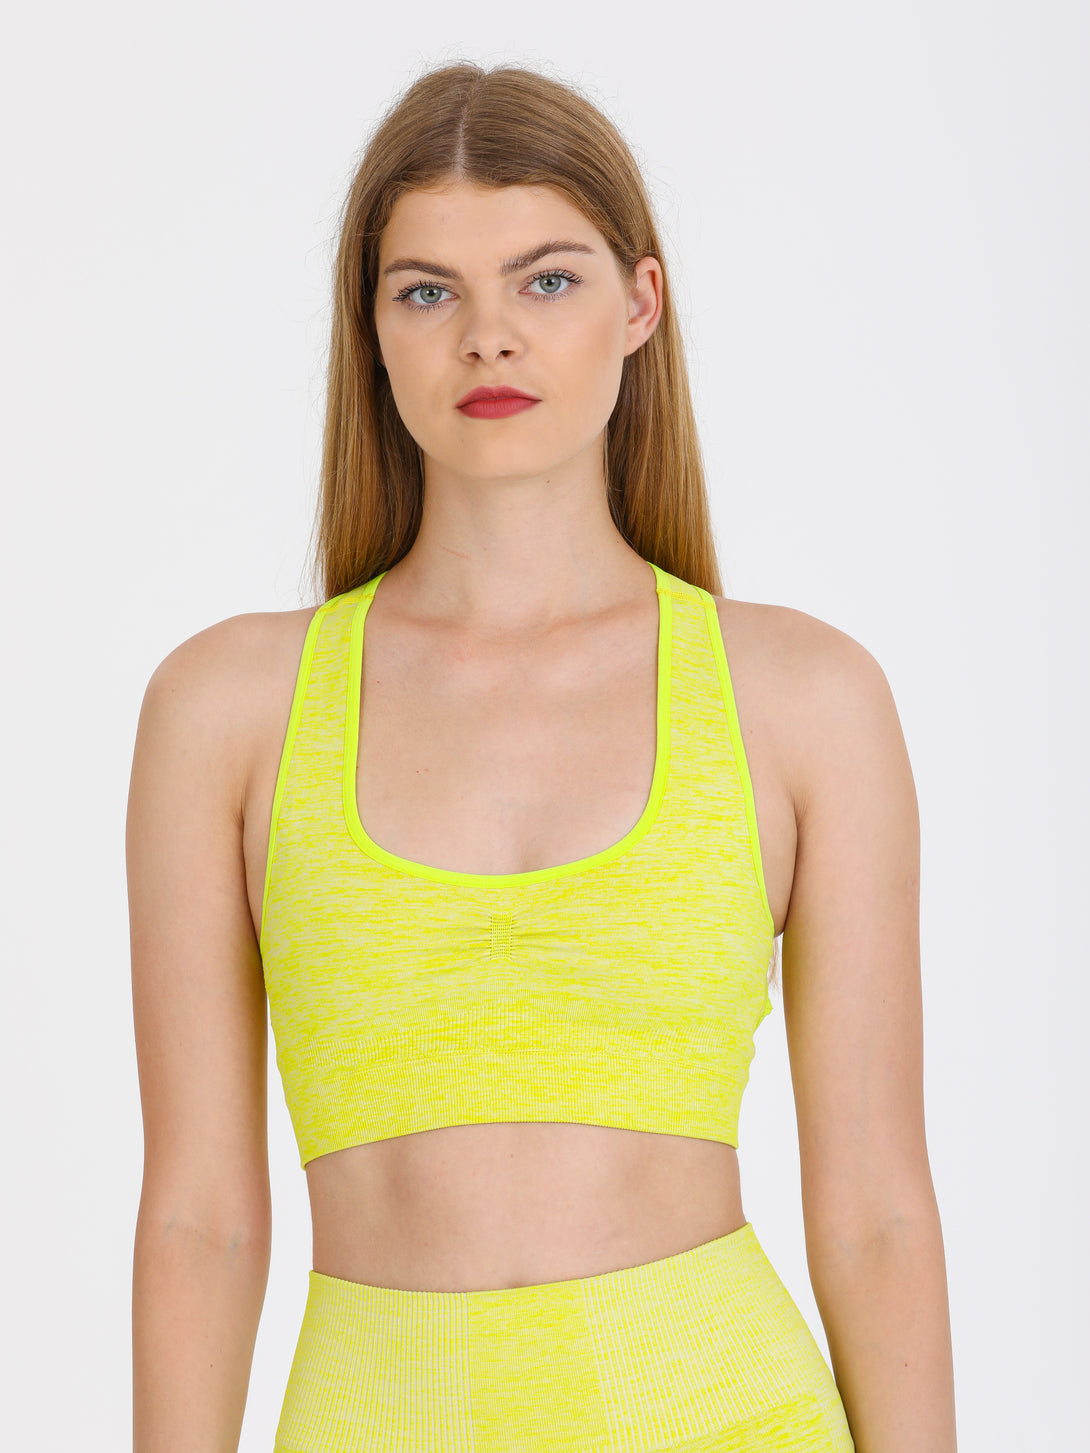 A Woman Wearing Lime Color Seamless Medium Support Sports Bra